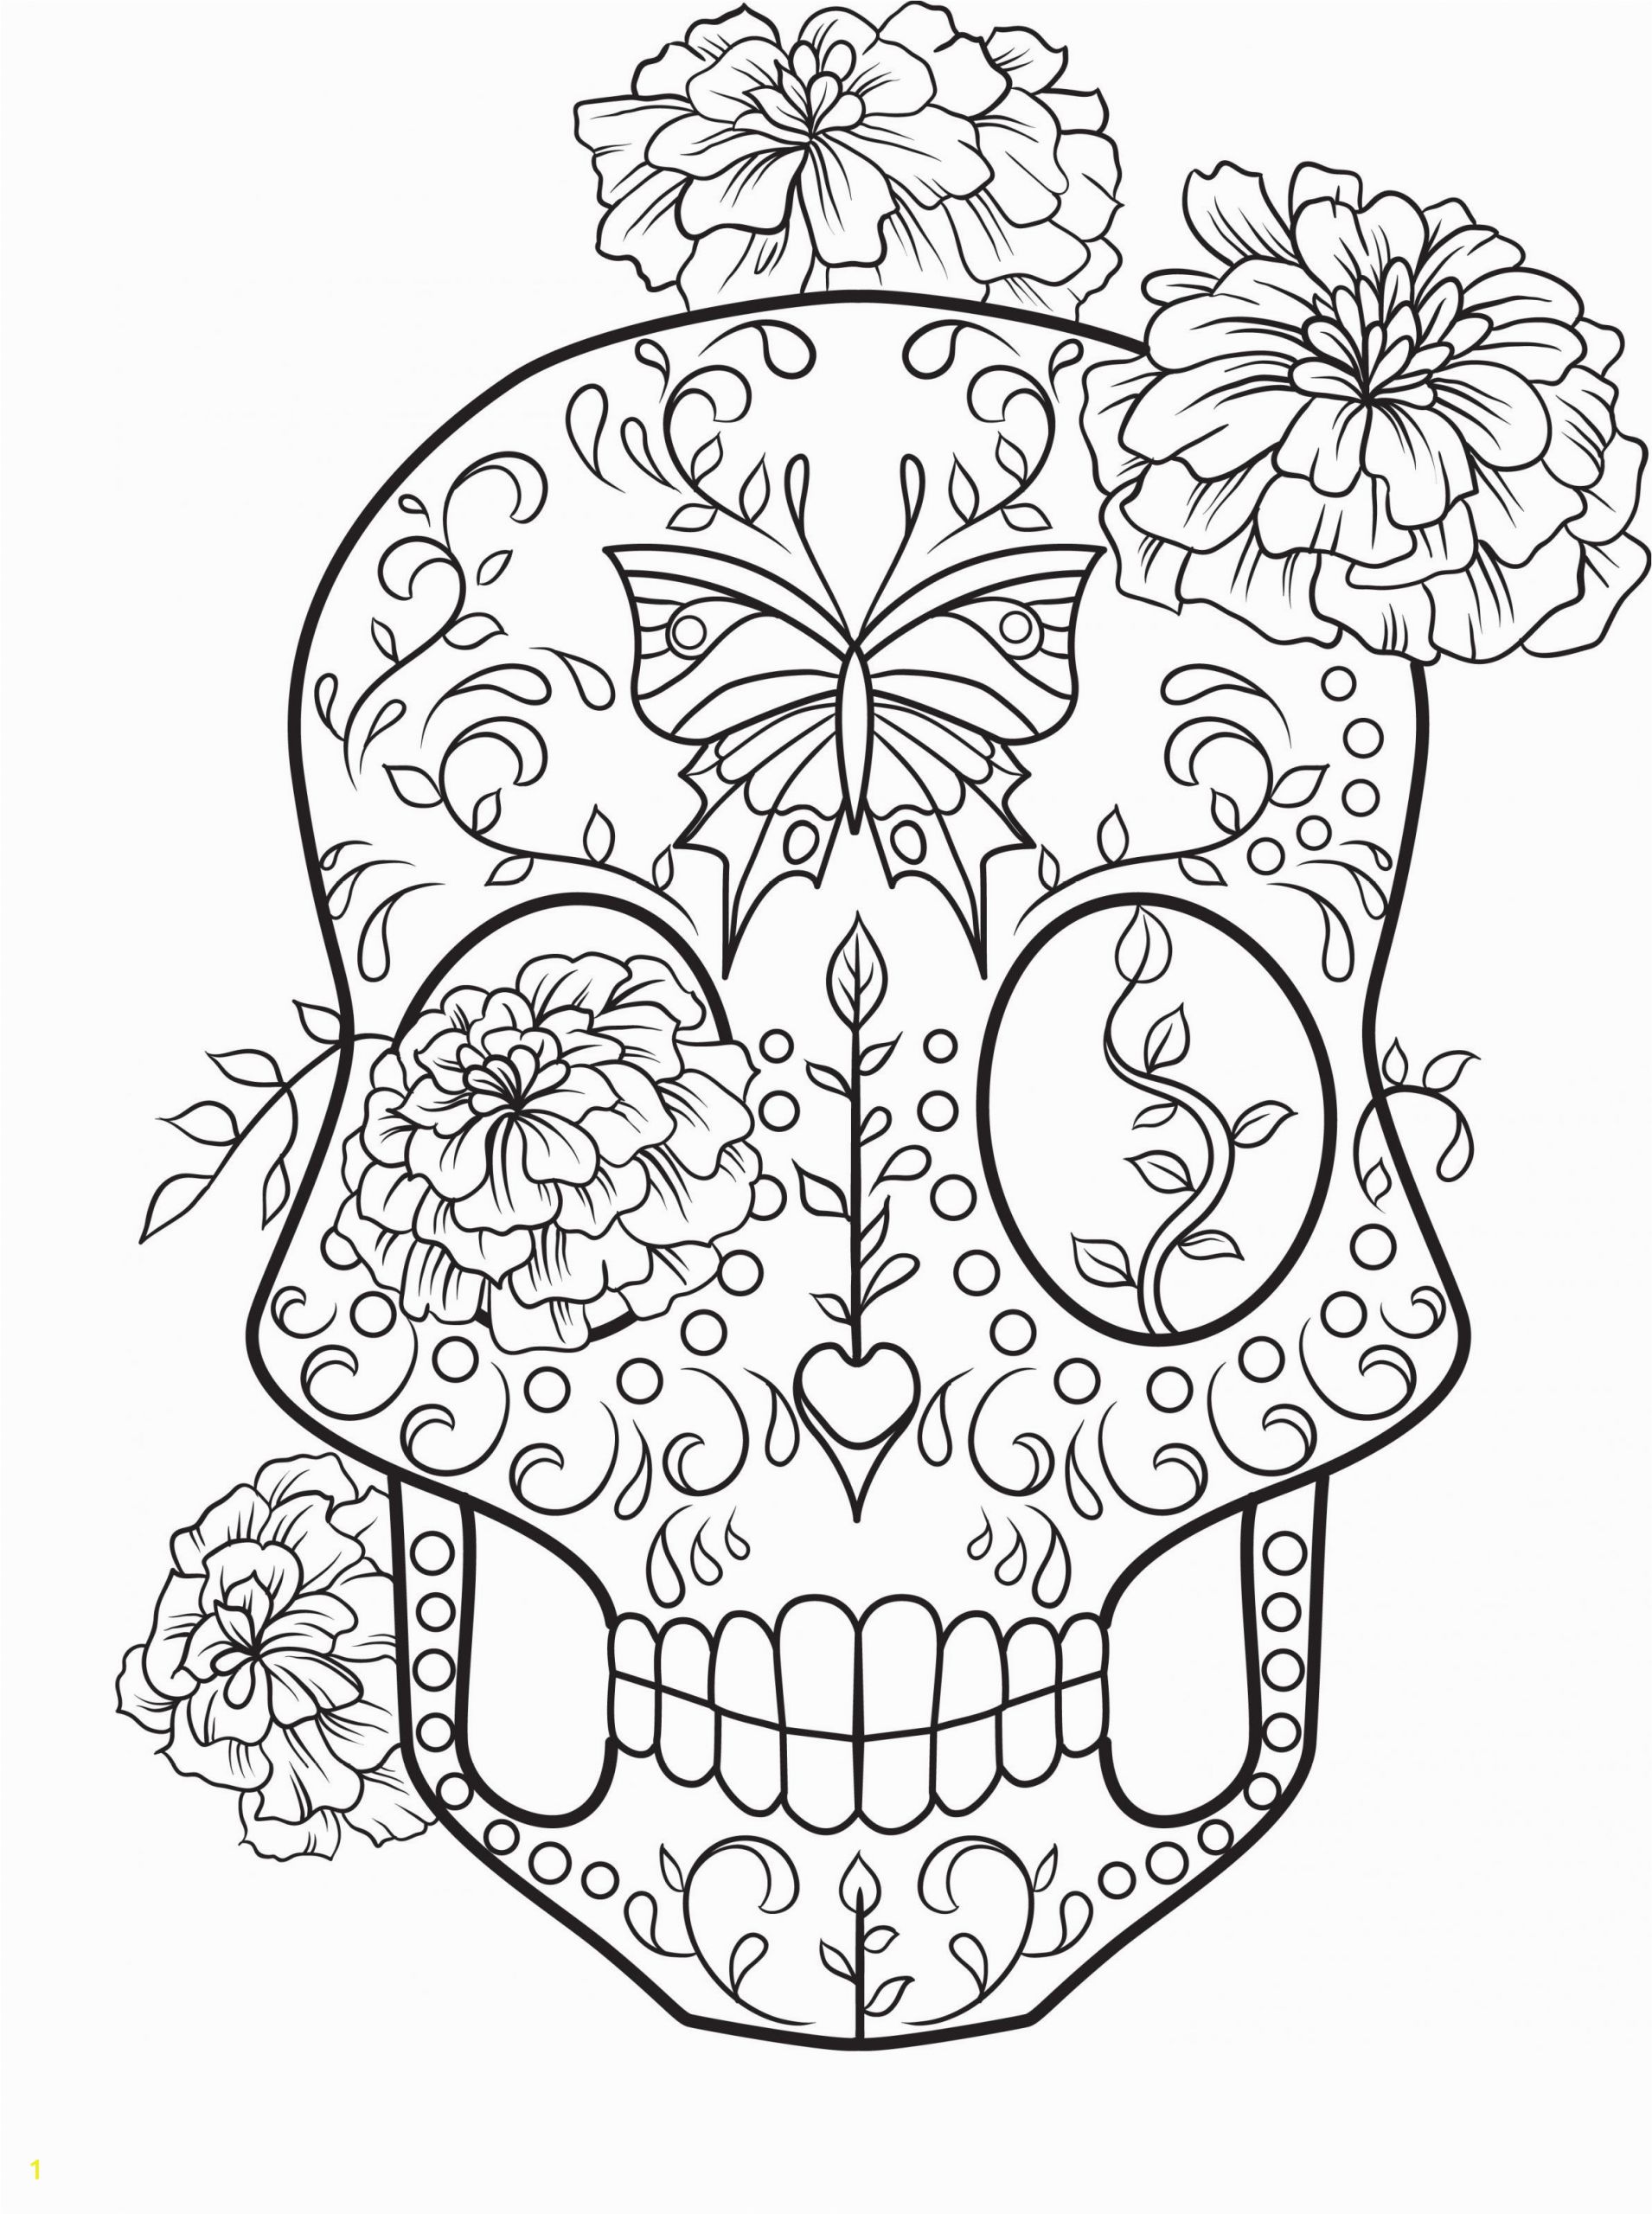 Sugar Skull Coloring Pages for Adults Sugar Skull Coloring Page Coloring Home